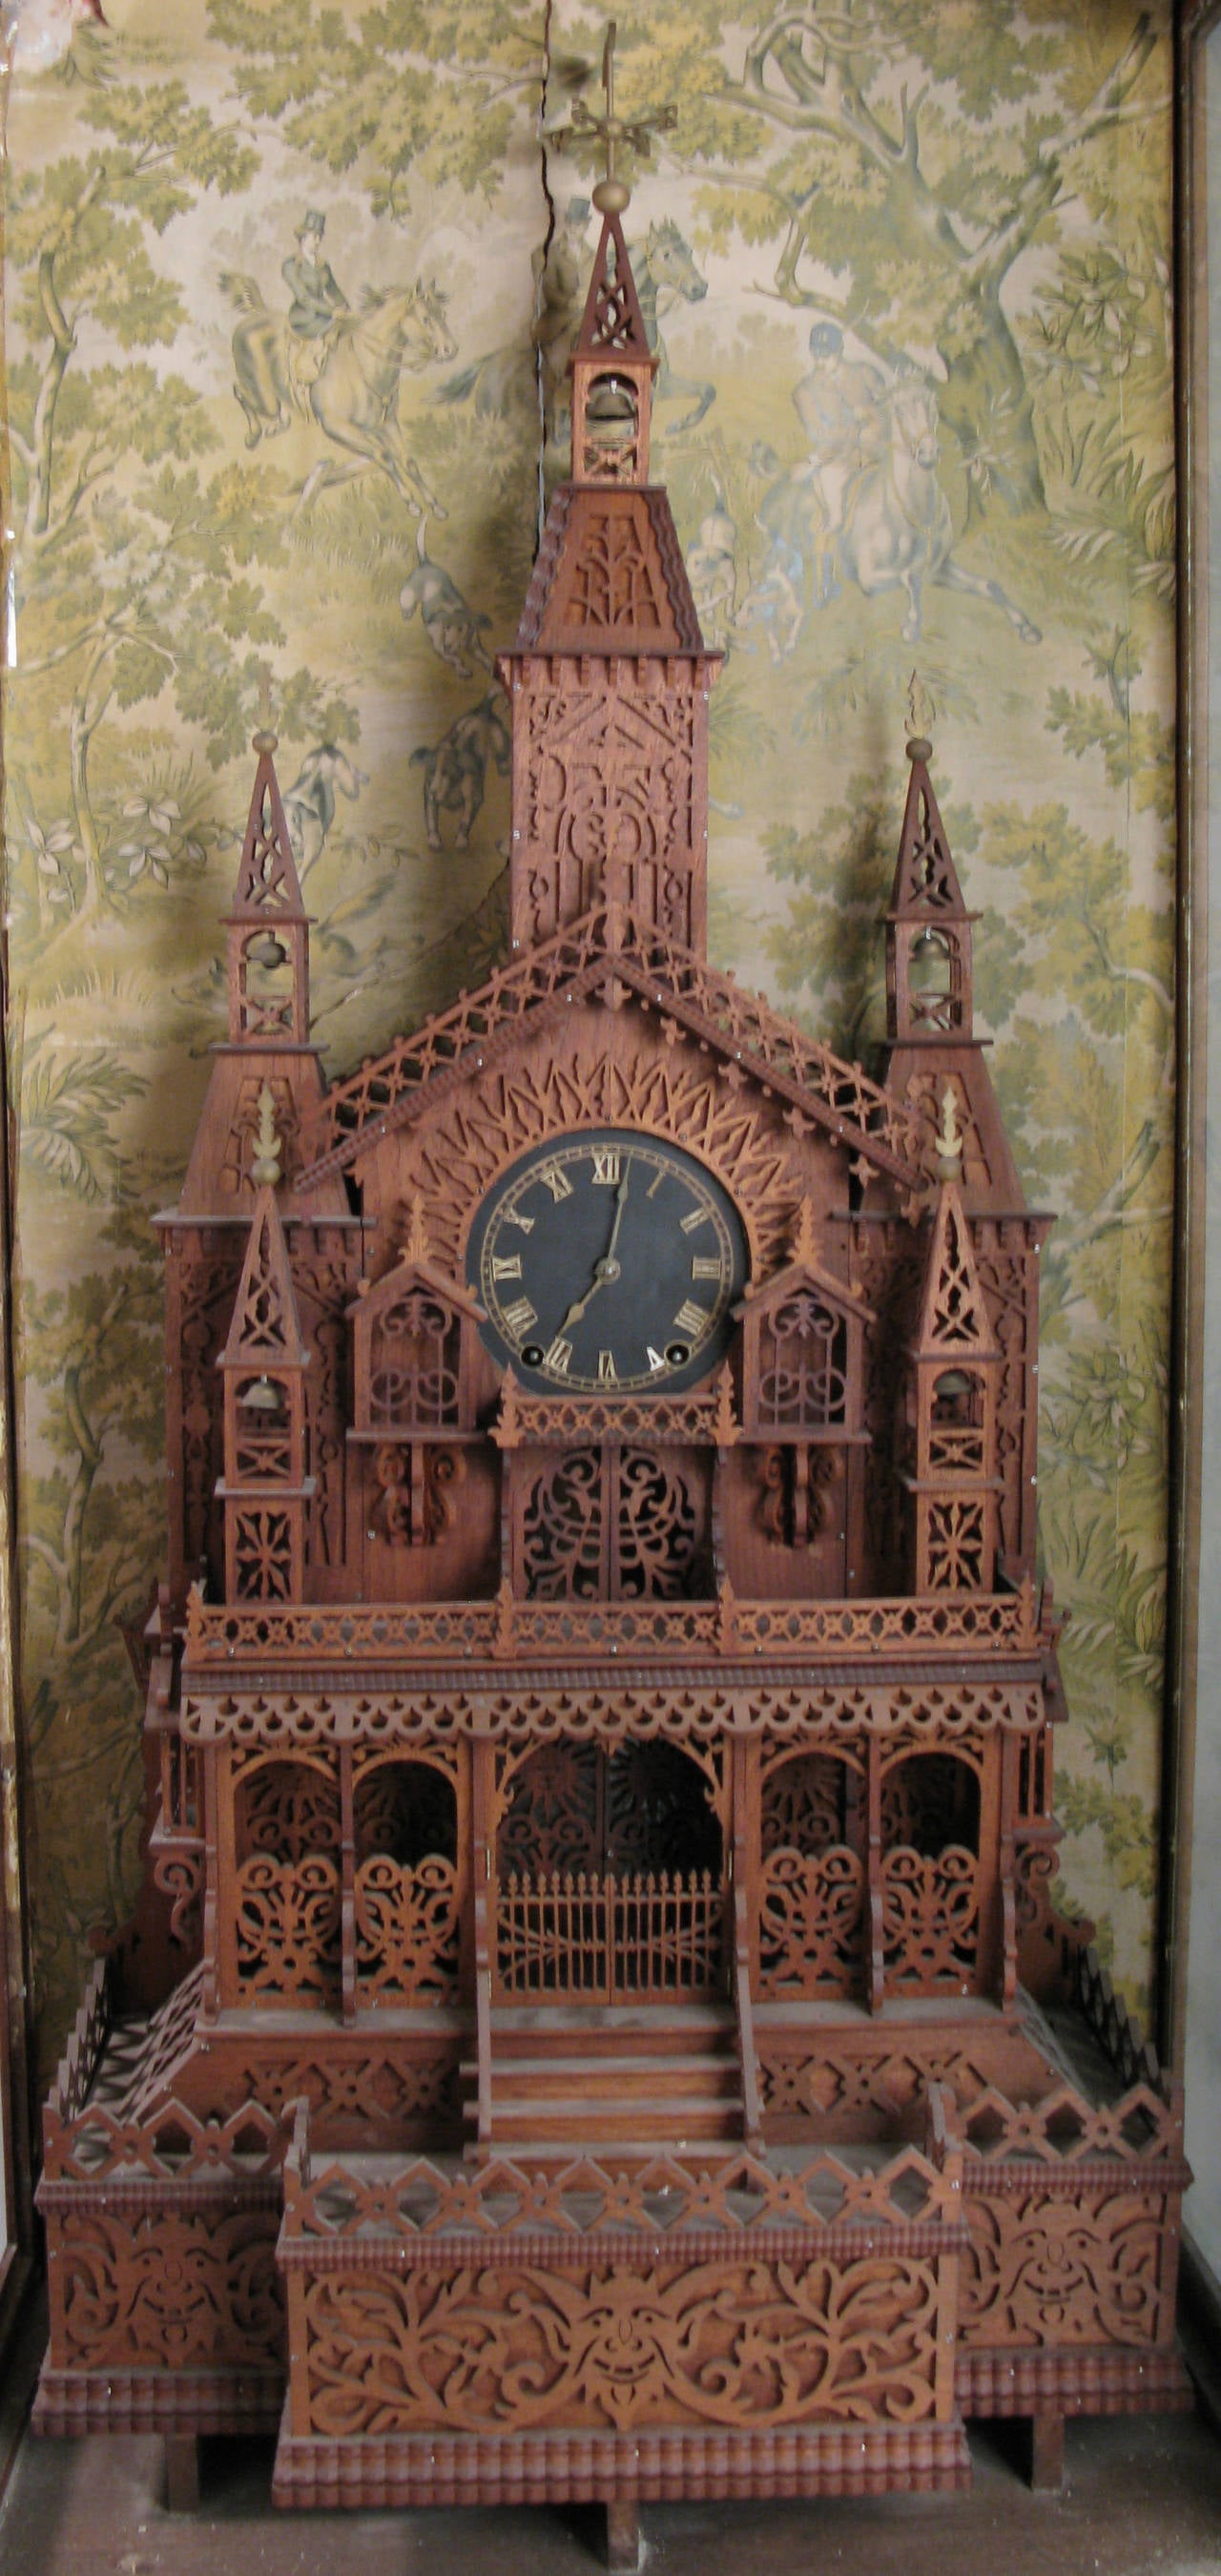 A charming large-scale very elaborate fork art replica of a cathedral, done in whittled wood, in its original period oak and glass display case, with period English wallpaper depicting a fox hunt.